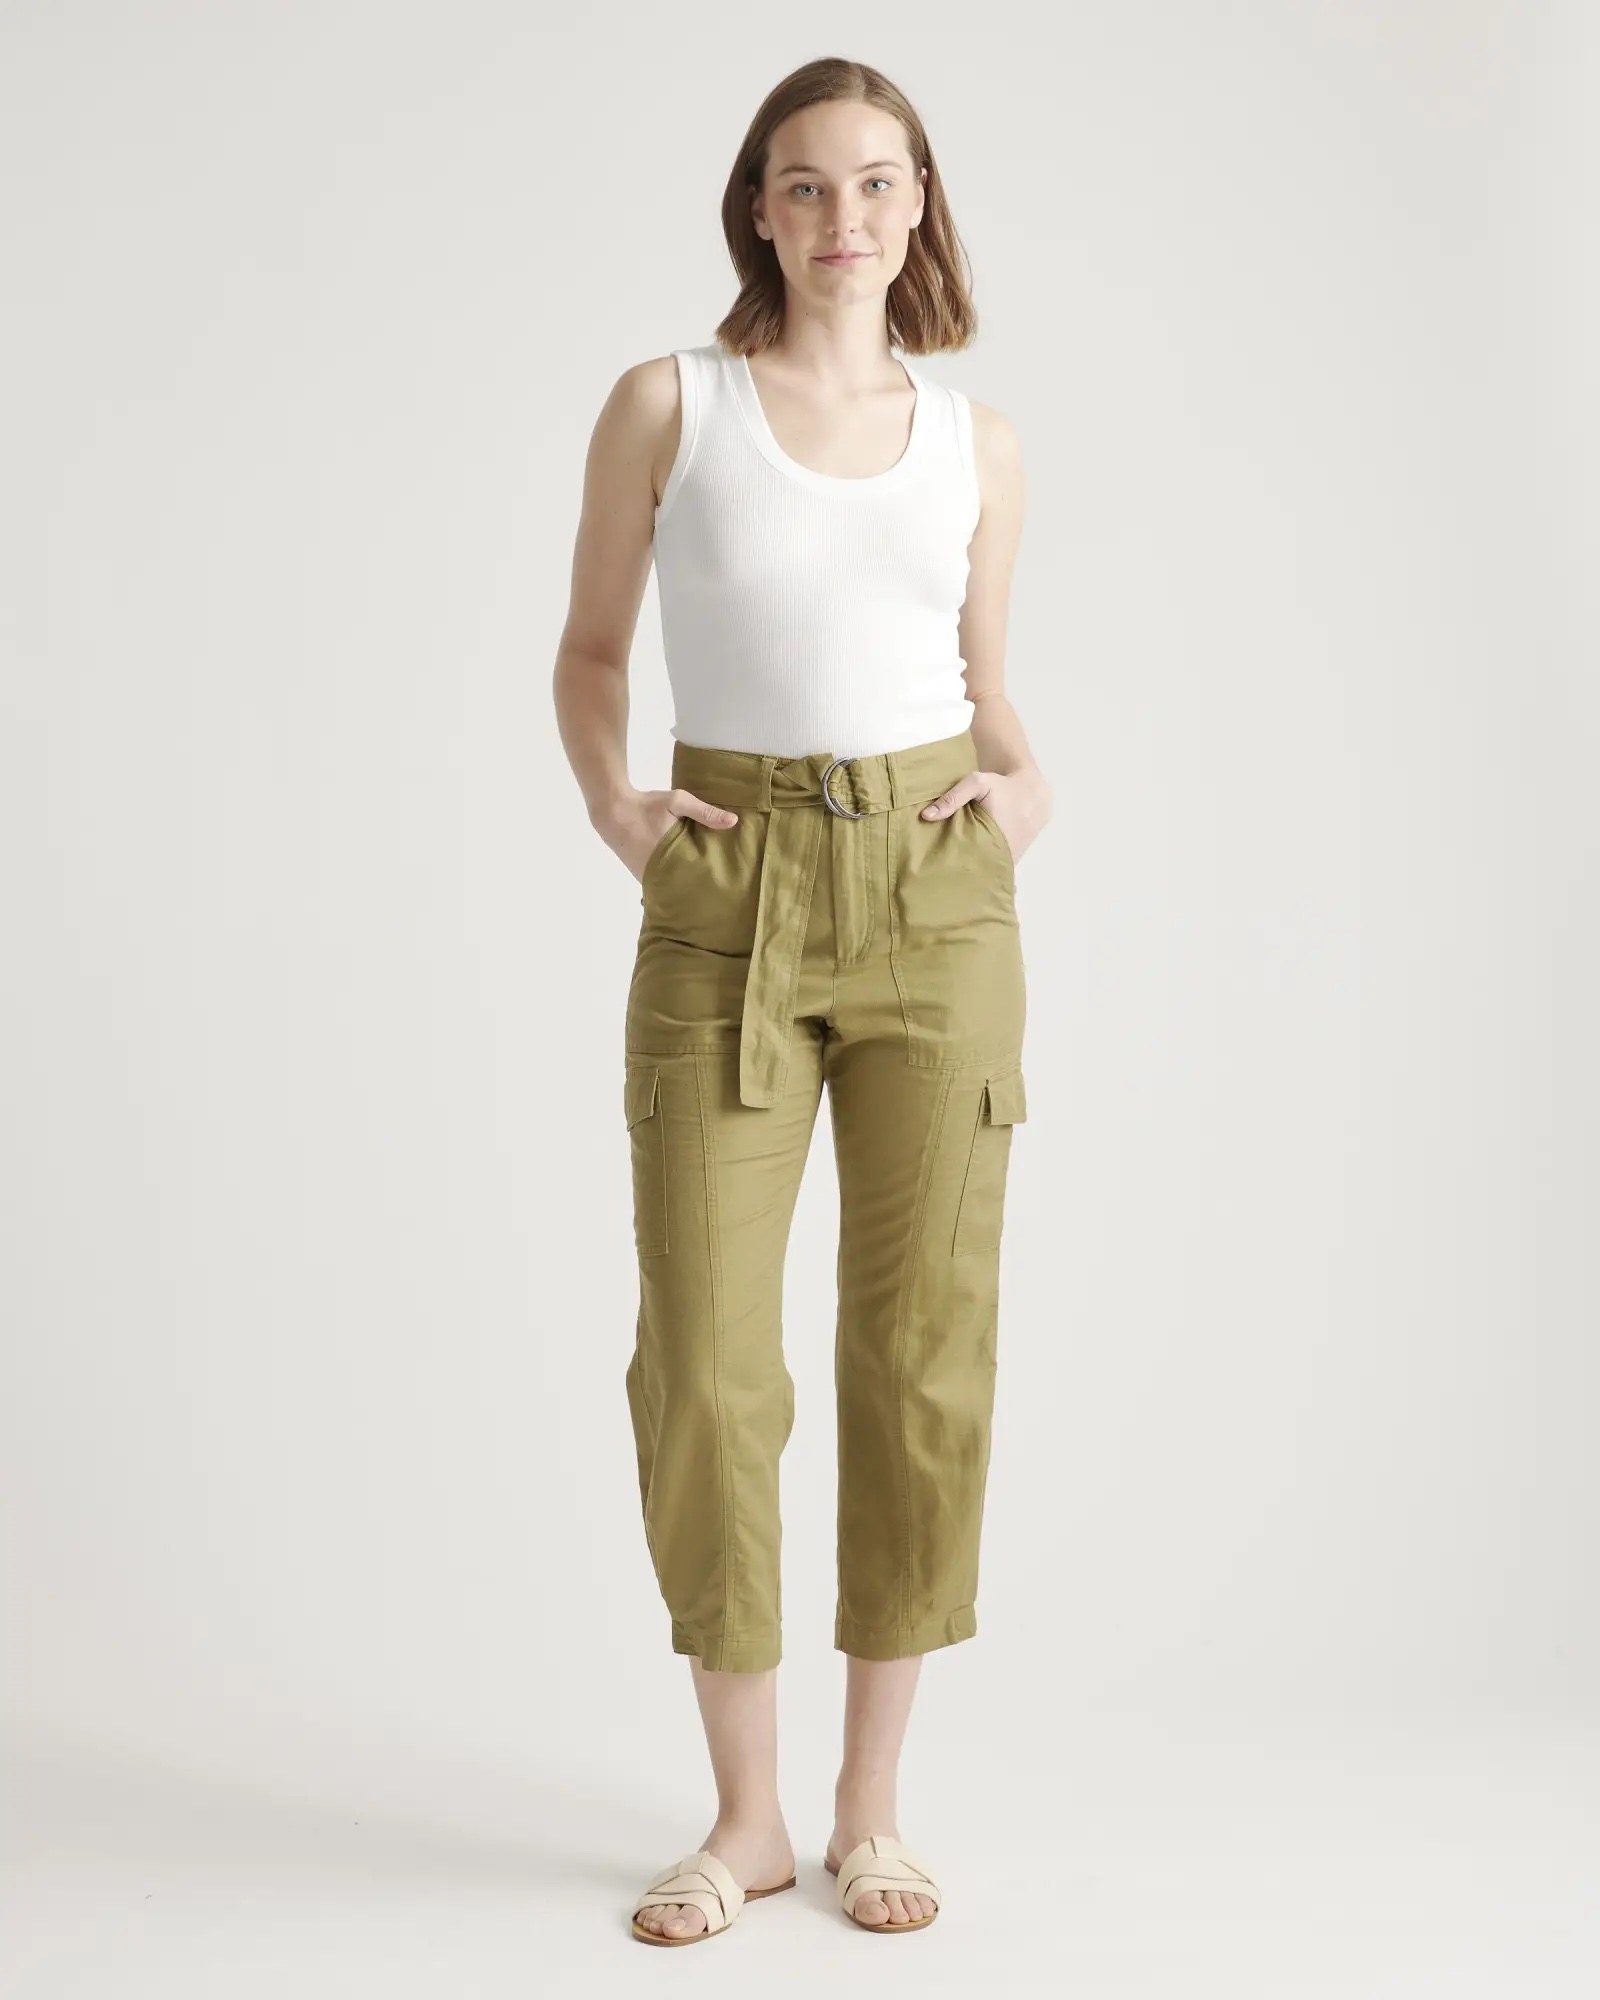 A white top with green pants and white shoes